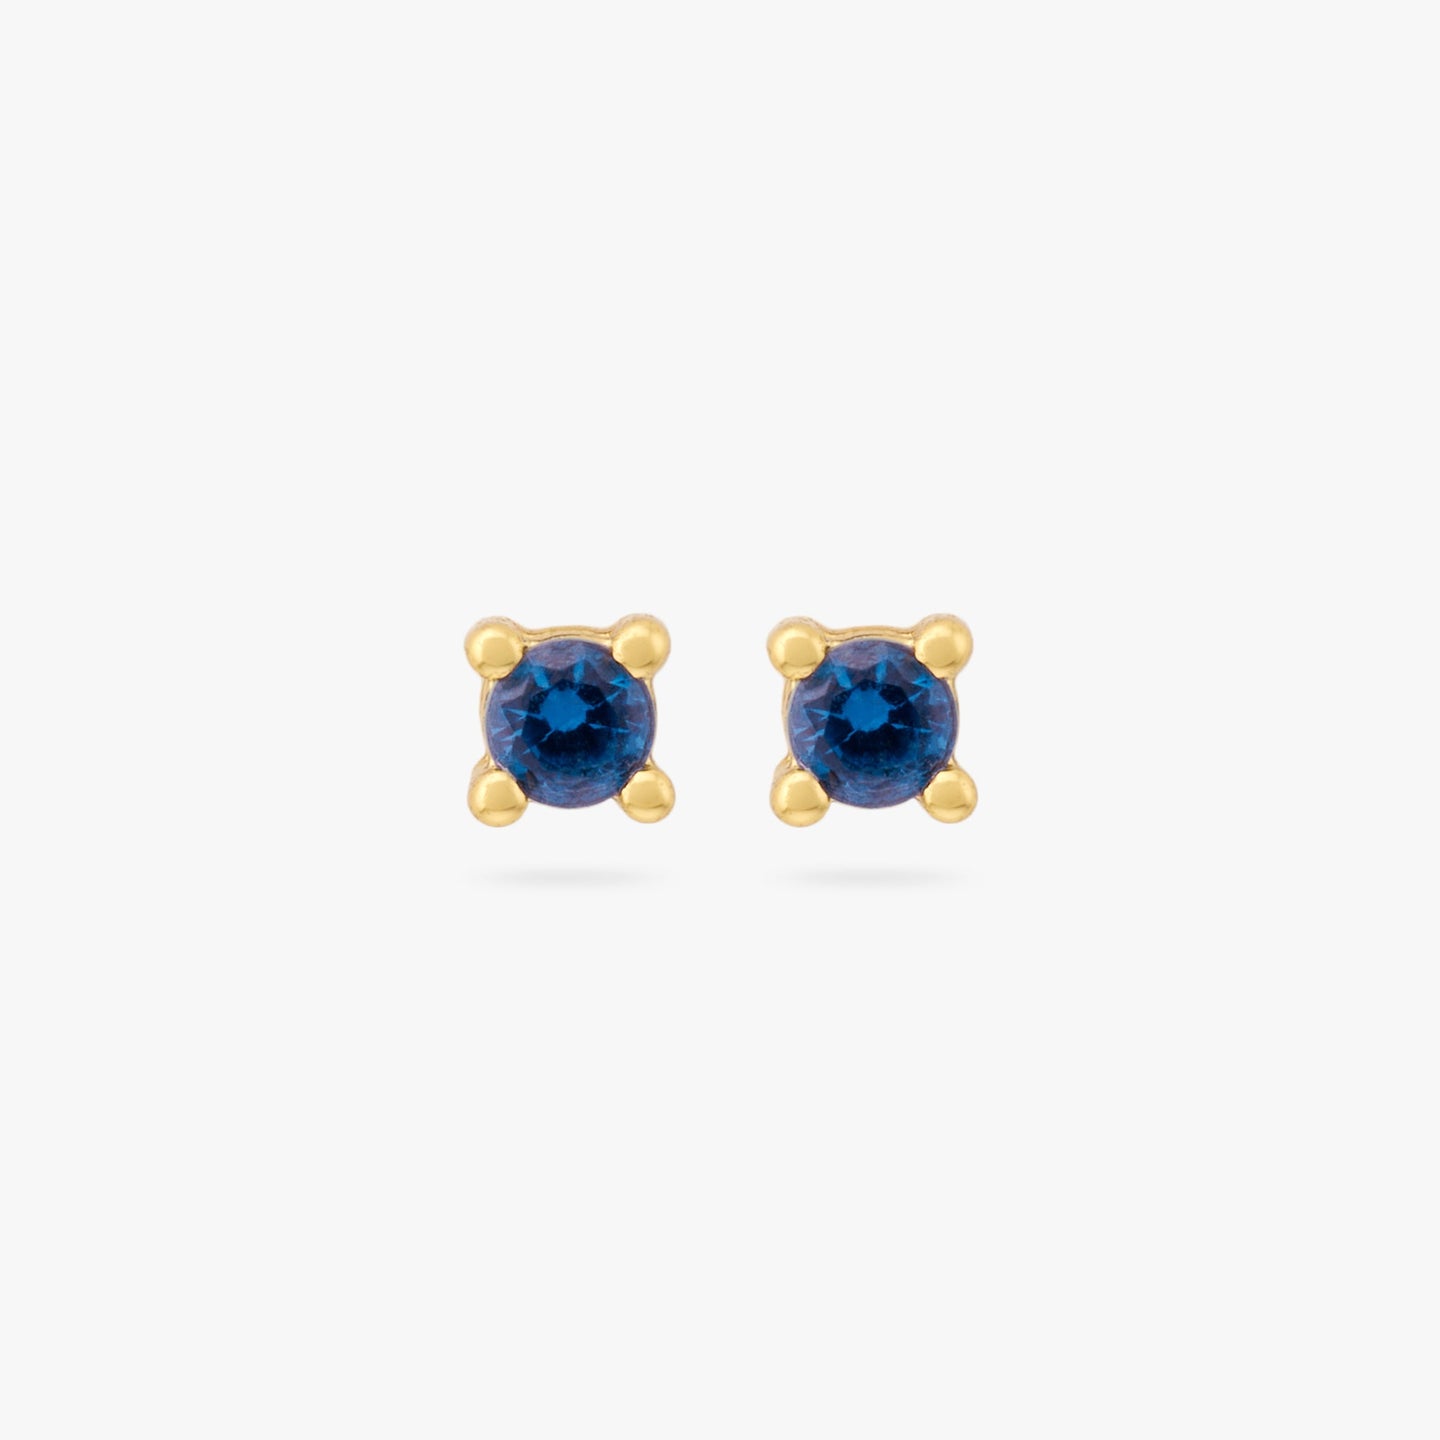 A pair of mini gold studs blue cz gems [pair] color:null|gold/blue